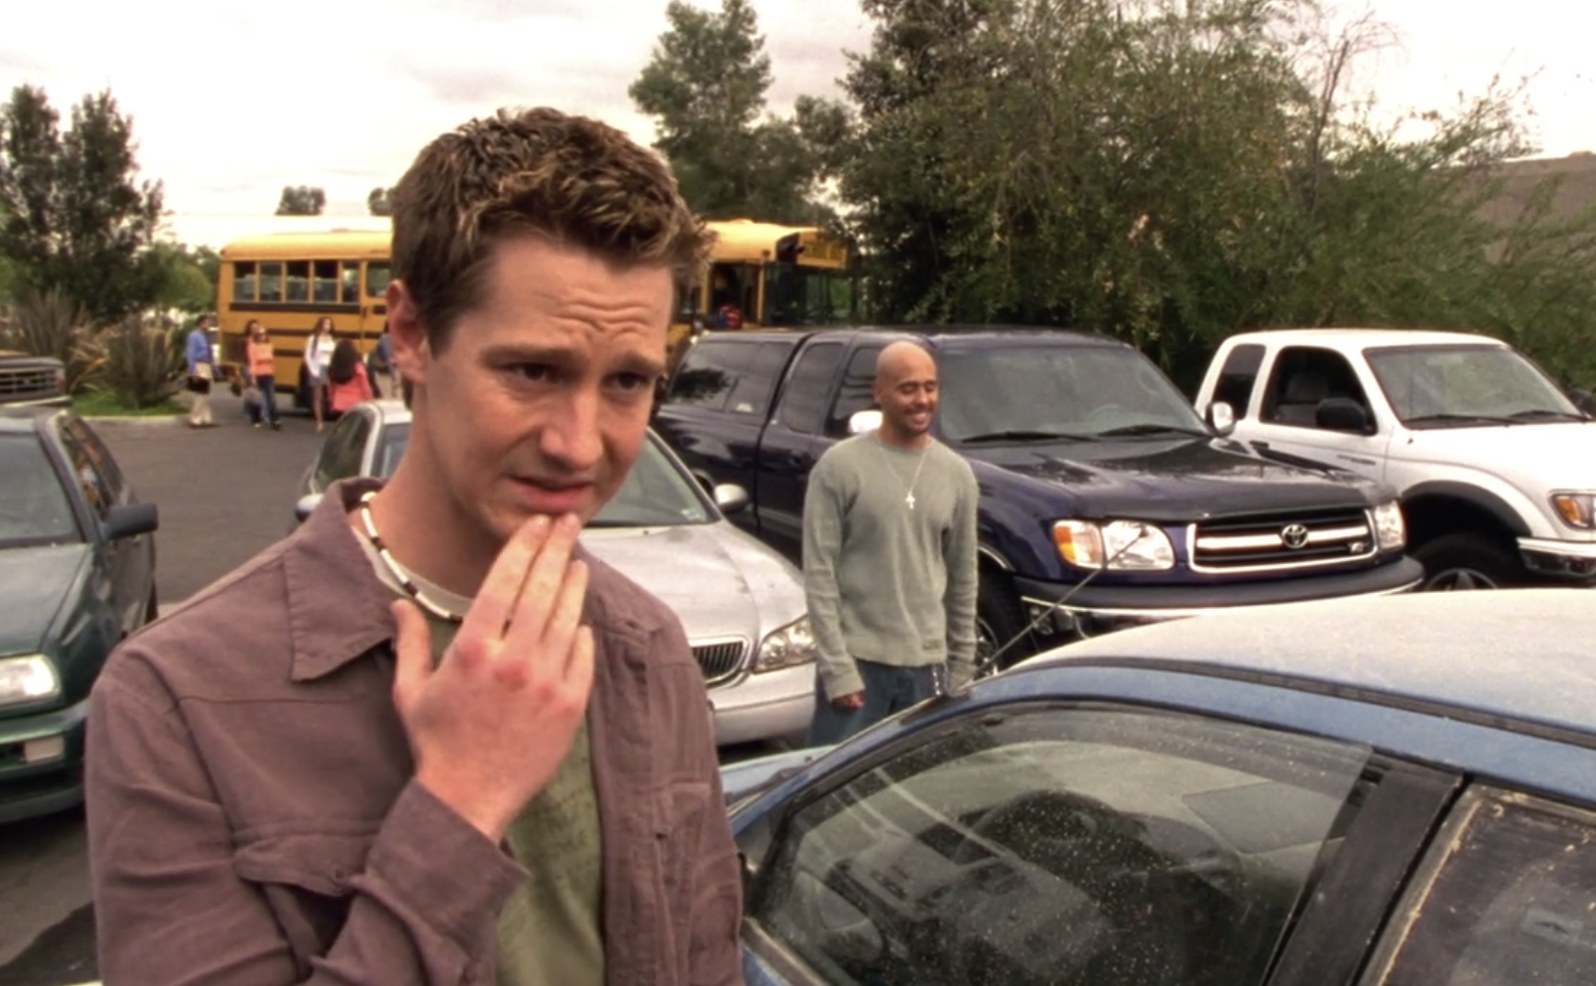 A screenshot from S1E7 of Veronica Mars. Logan is in the foreground in a brown button down shirt with an army green shirt underneath. He is looking at an off-screen character with a look of mock concern, his hand on his chin. Weevil is in the background laughing. They're in a parking lot.